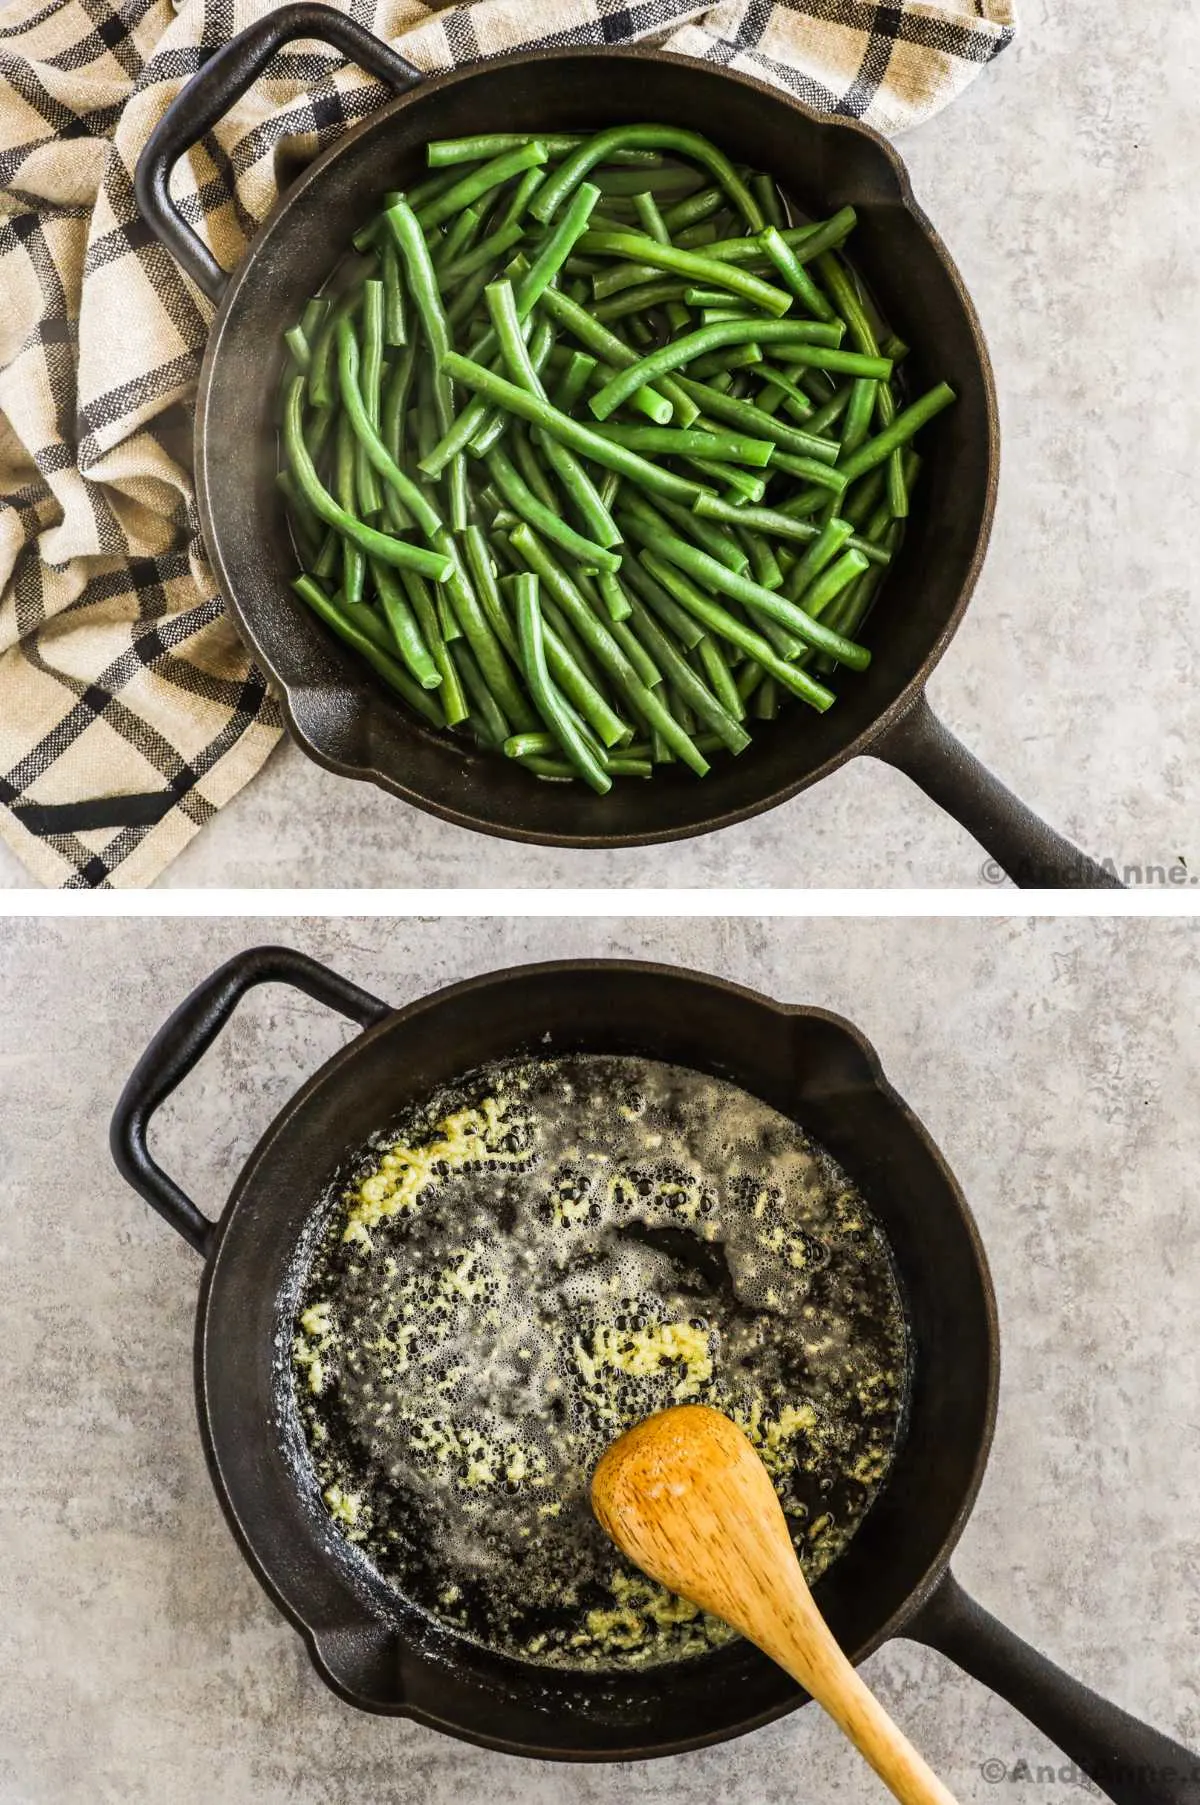 Two overhead images in one: 1. Blanched green beans in a cast iron skillet on top of a black and white tablecloth. 2. Melted butter and minced garlic in the same cast iron pan. 